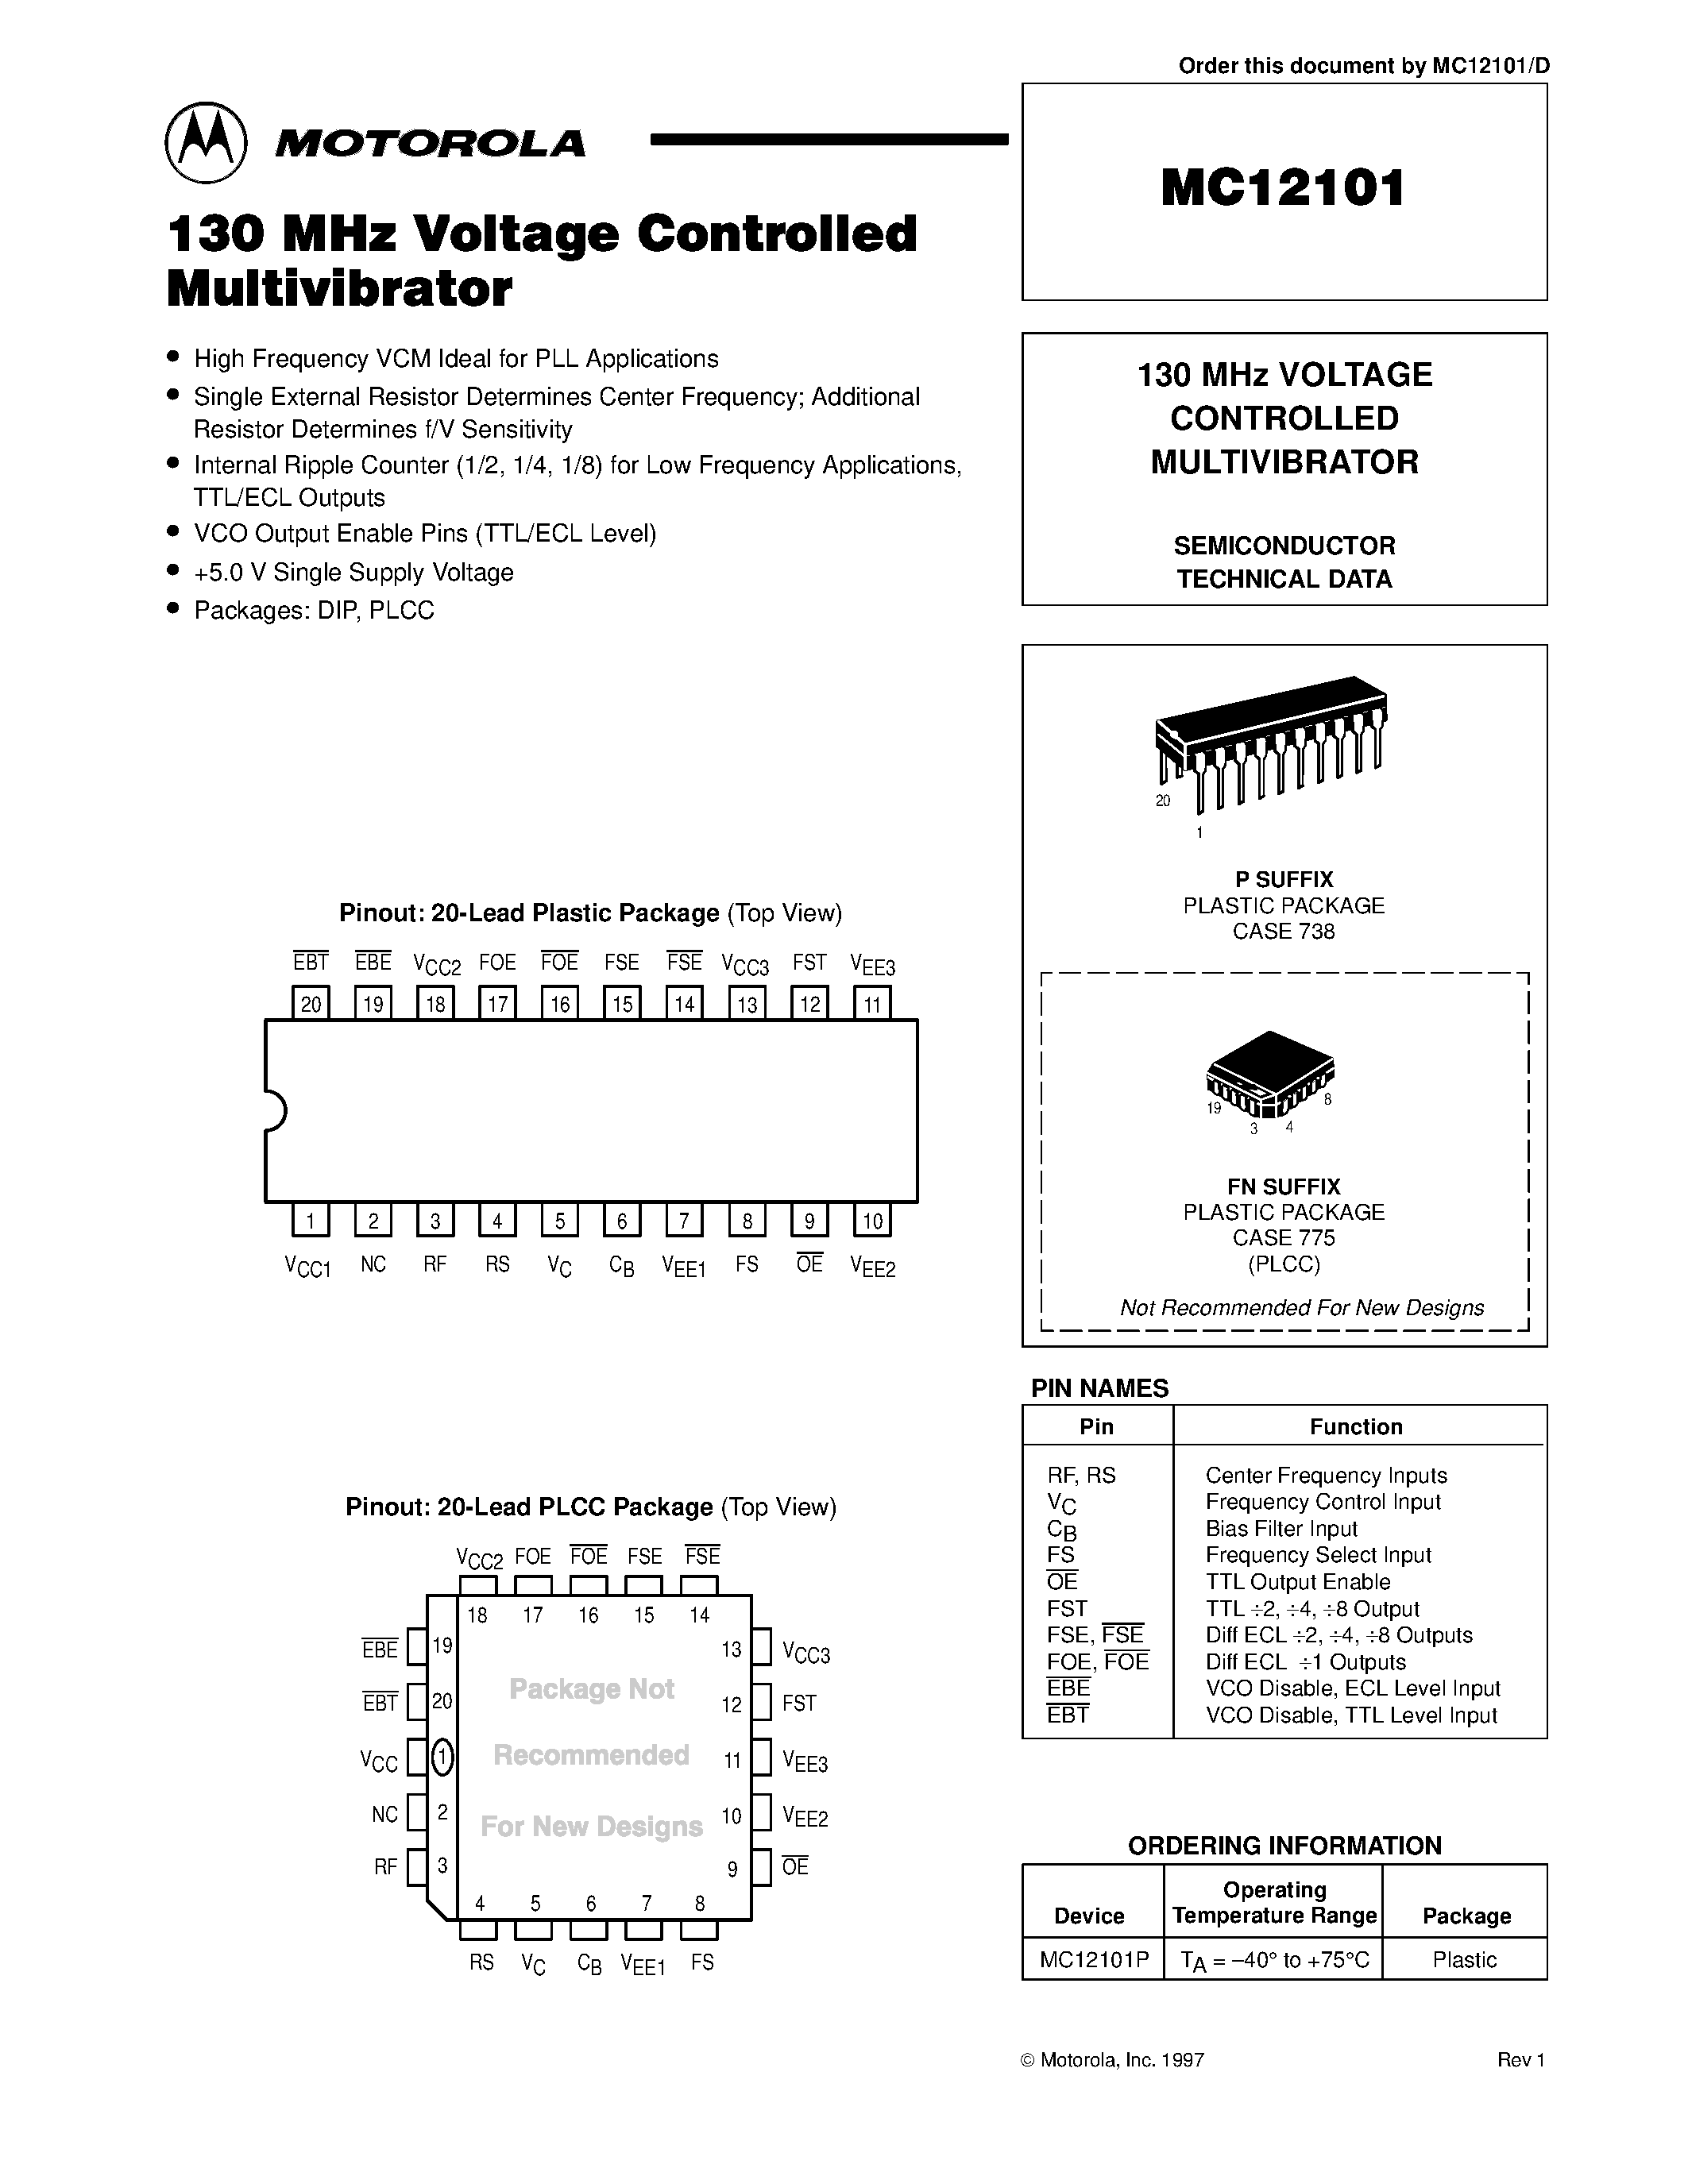 Datasheet MC12101FN - 130 MHz VOLTAGE CONTROLLED MULTIVIBRATOR page 1